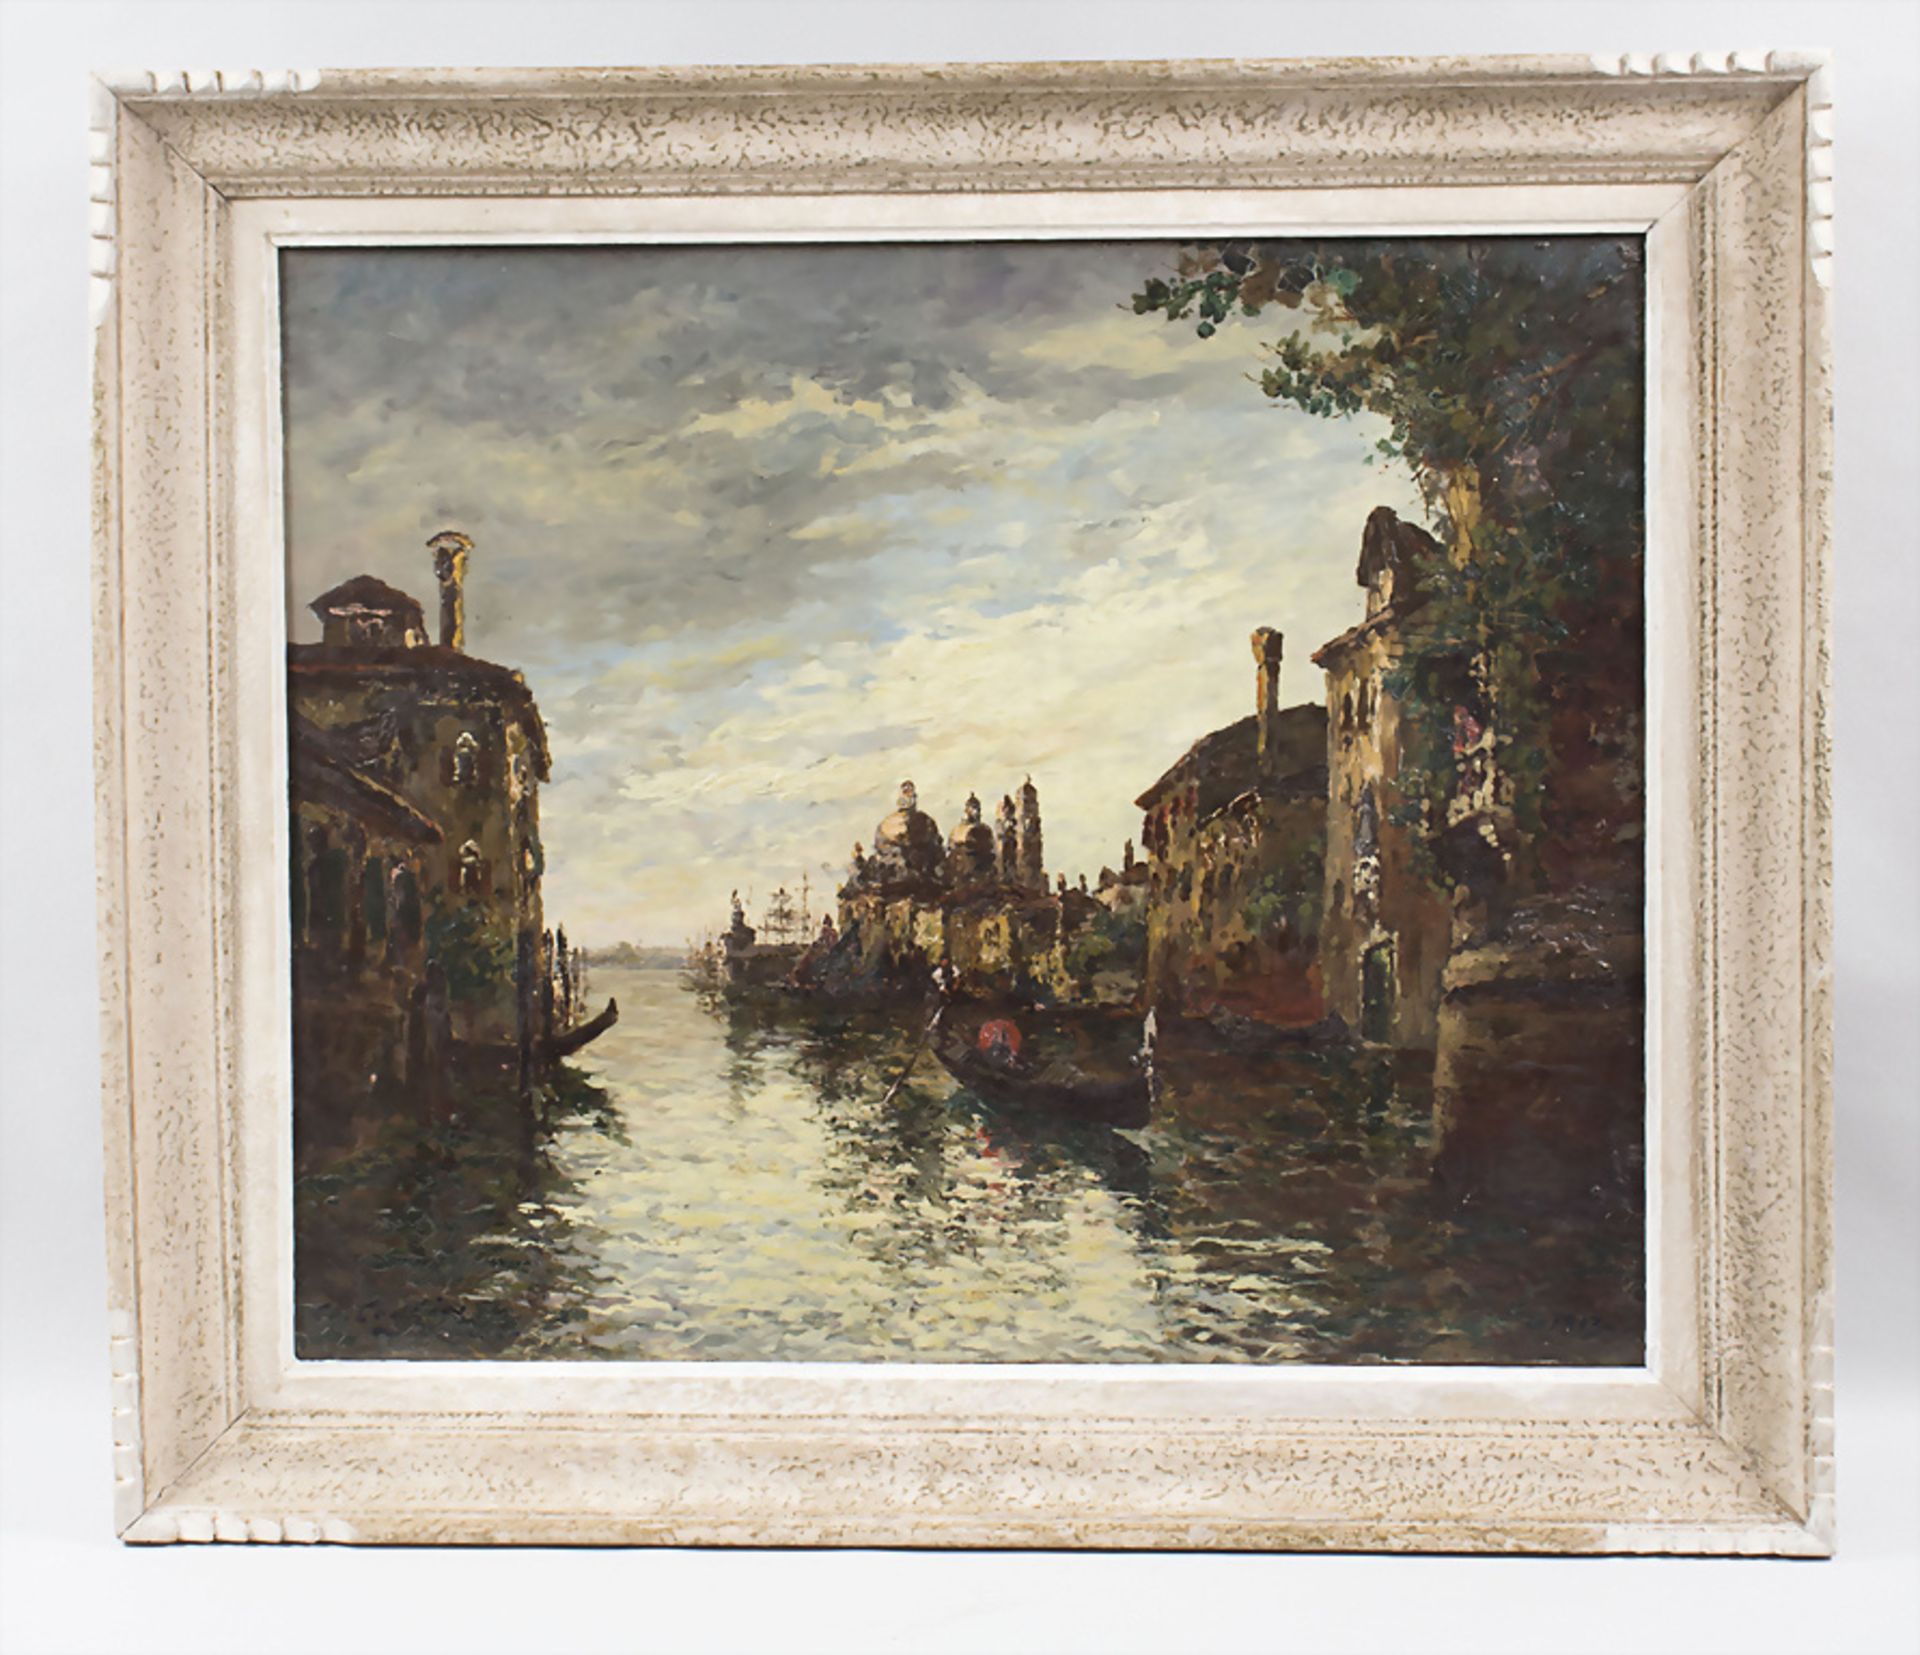 Charles Eugène COUSIN (19./20. Jh.), 'Ansicht von Venedig' / 'A view of Venice', 1913 - Image 2 of 6